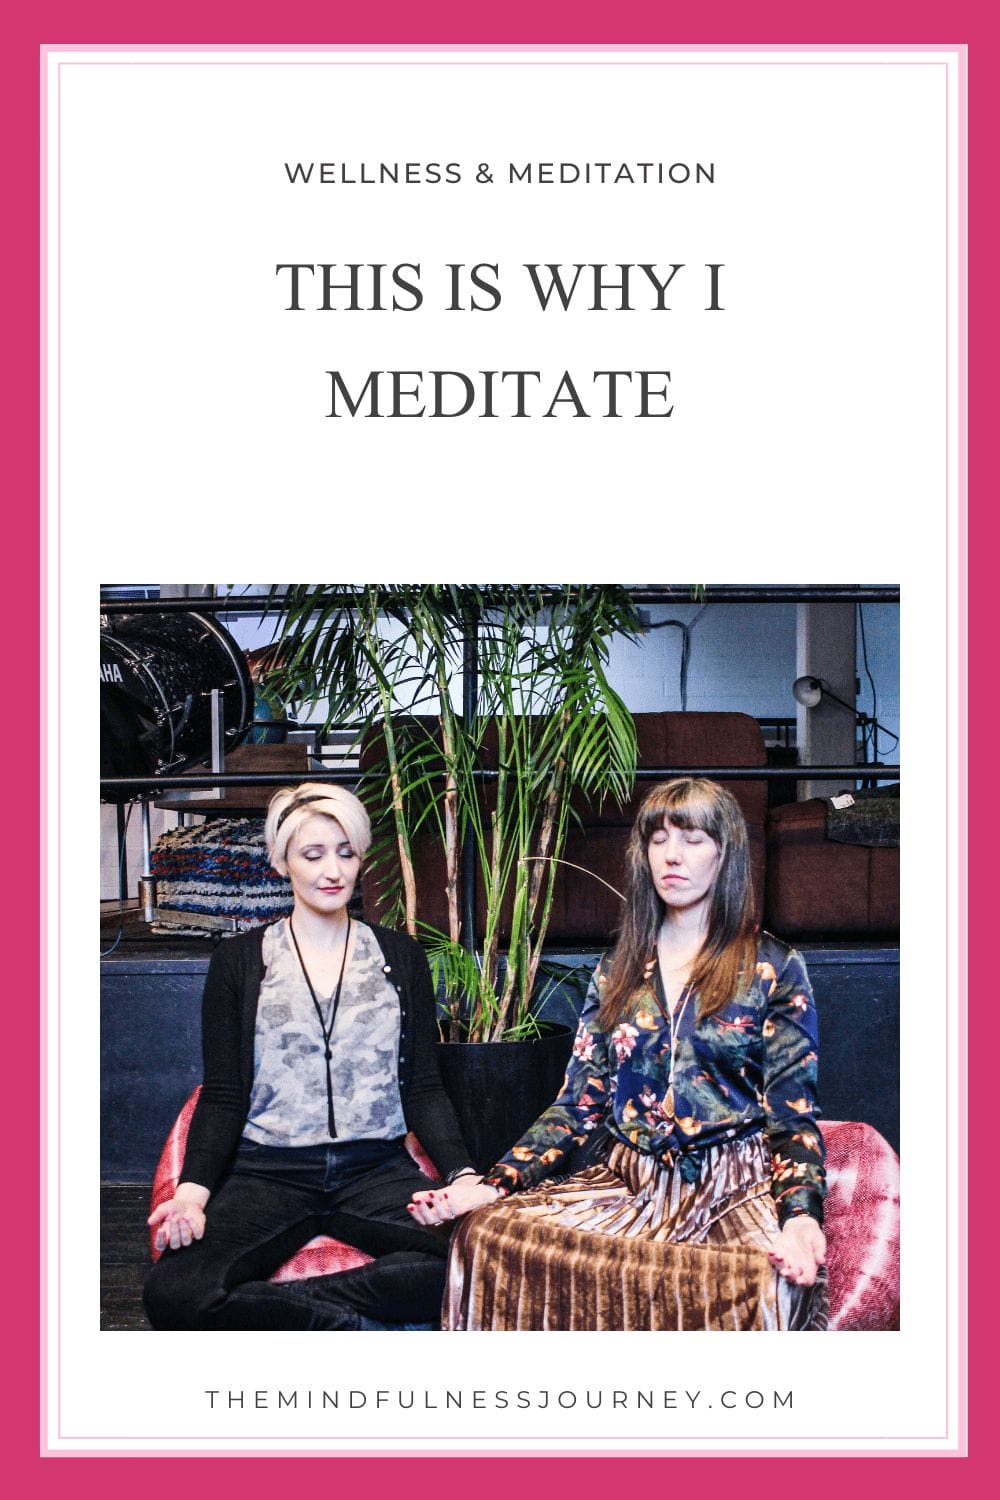 This is why I meditate | The Mindfulness Journey | 2 women Meditating | Meditation